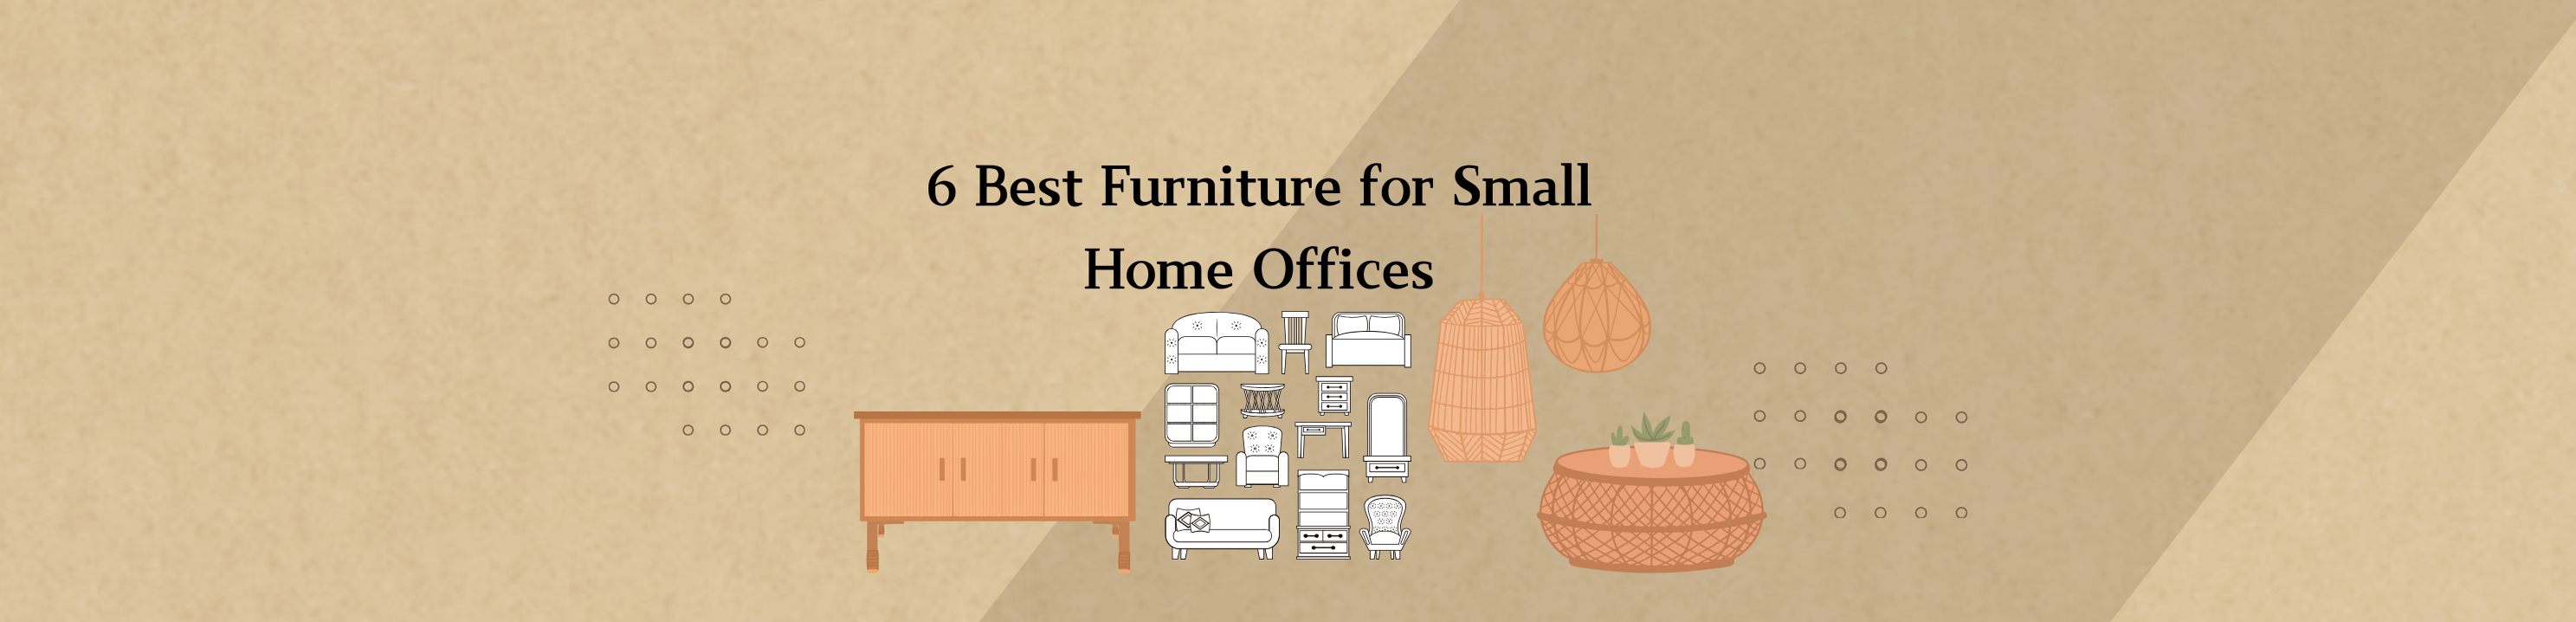 6 Best Furniture for Small Home Offices